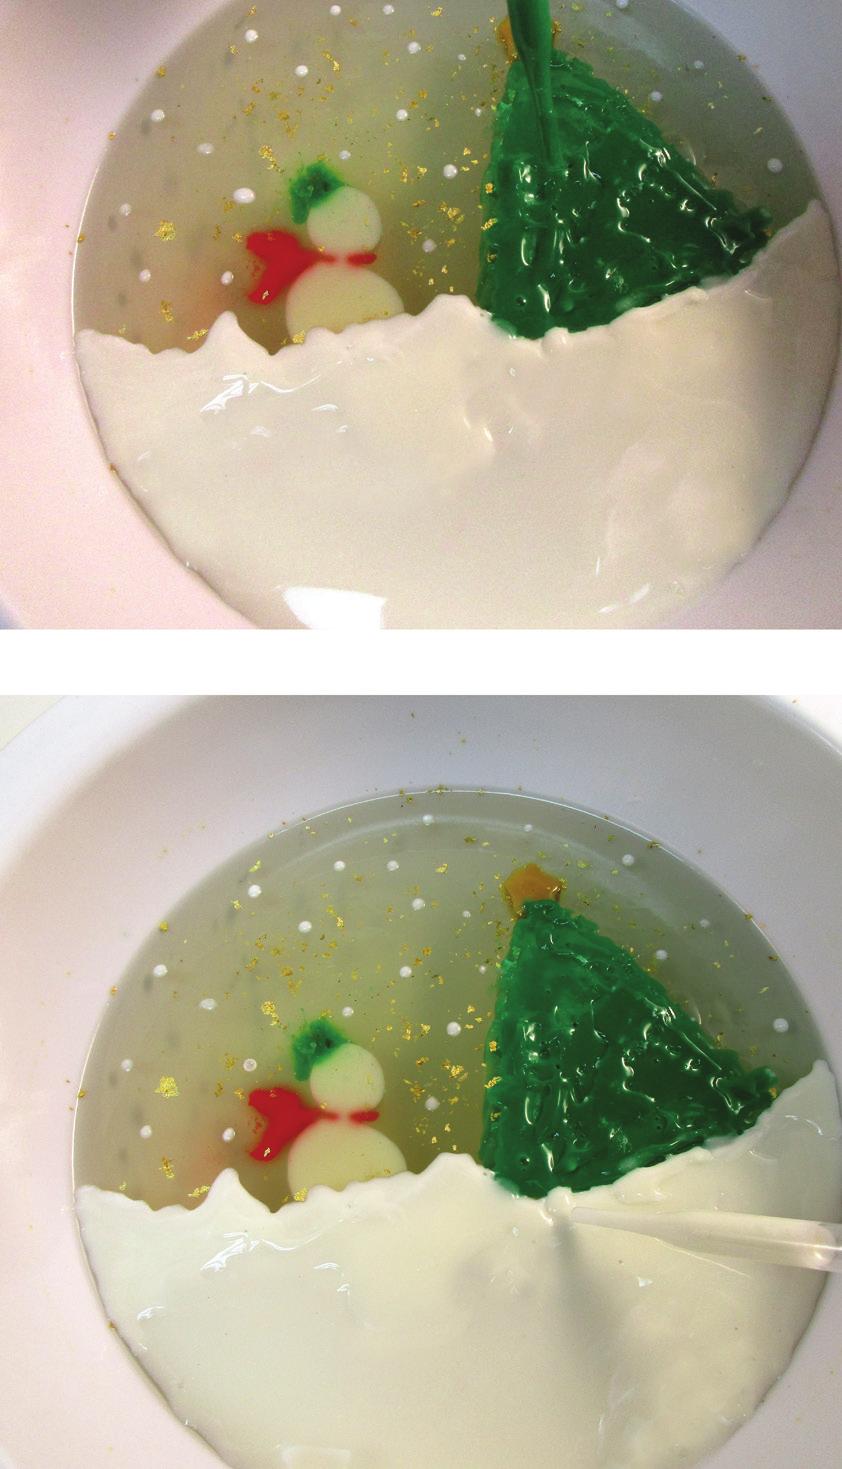 Step 22: Make some little snowflakes with milk gelatin using a dropper. Let set in the fridge for 15 minutes.